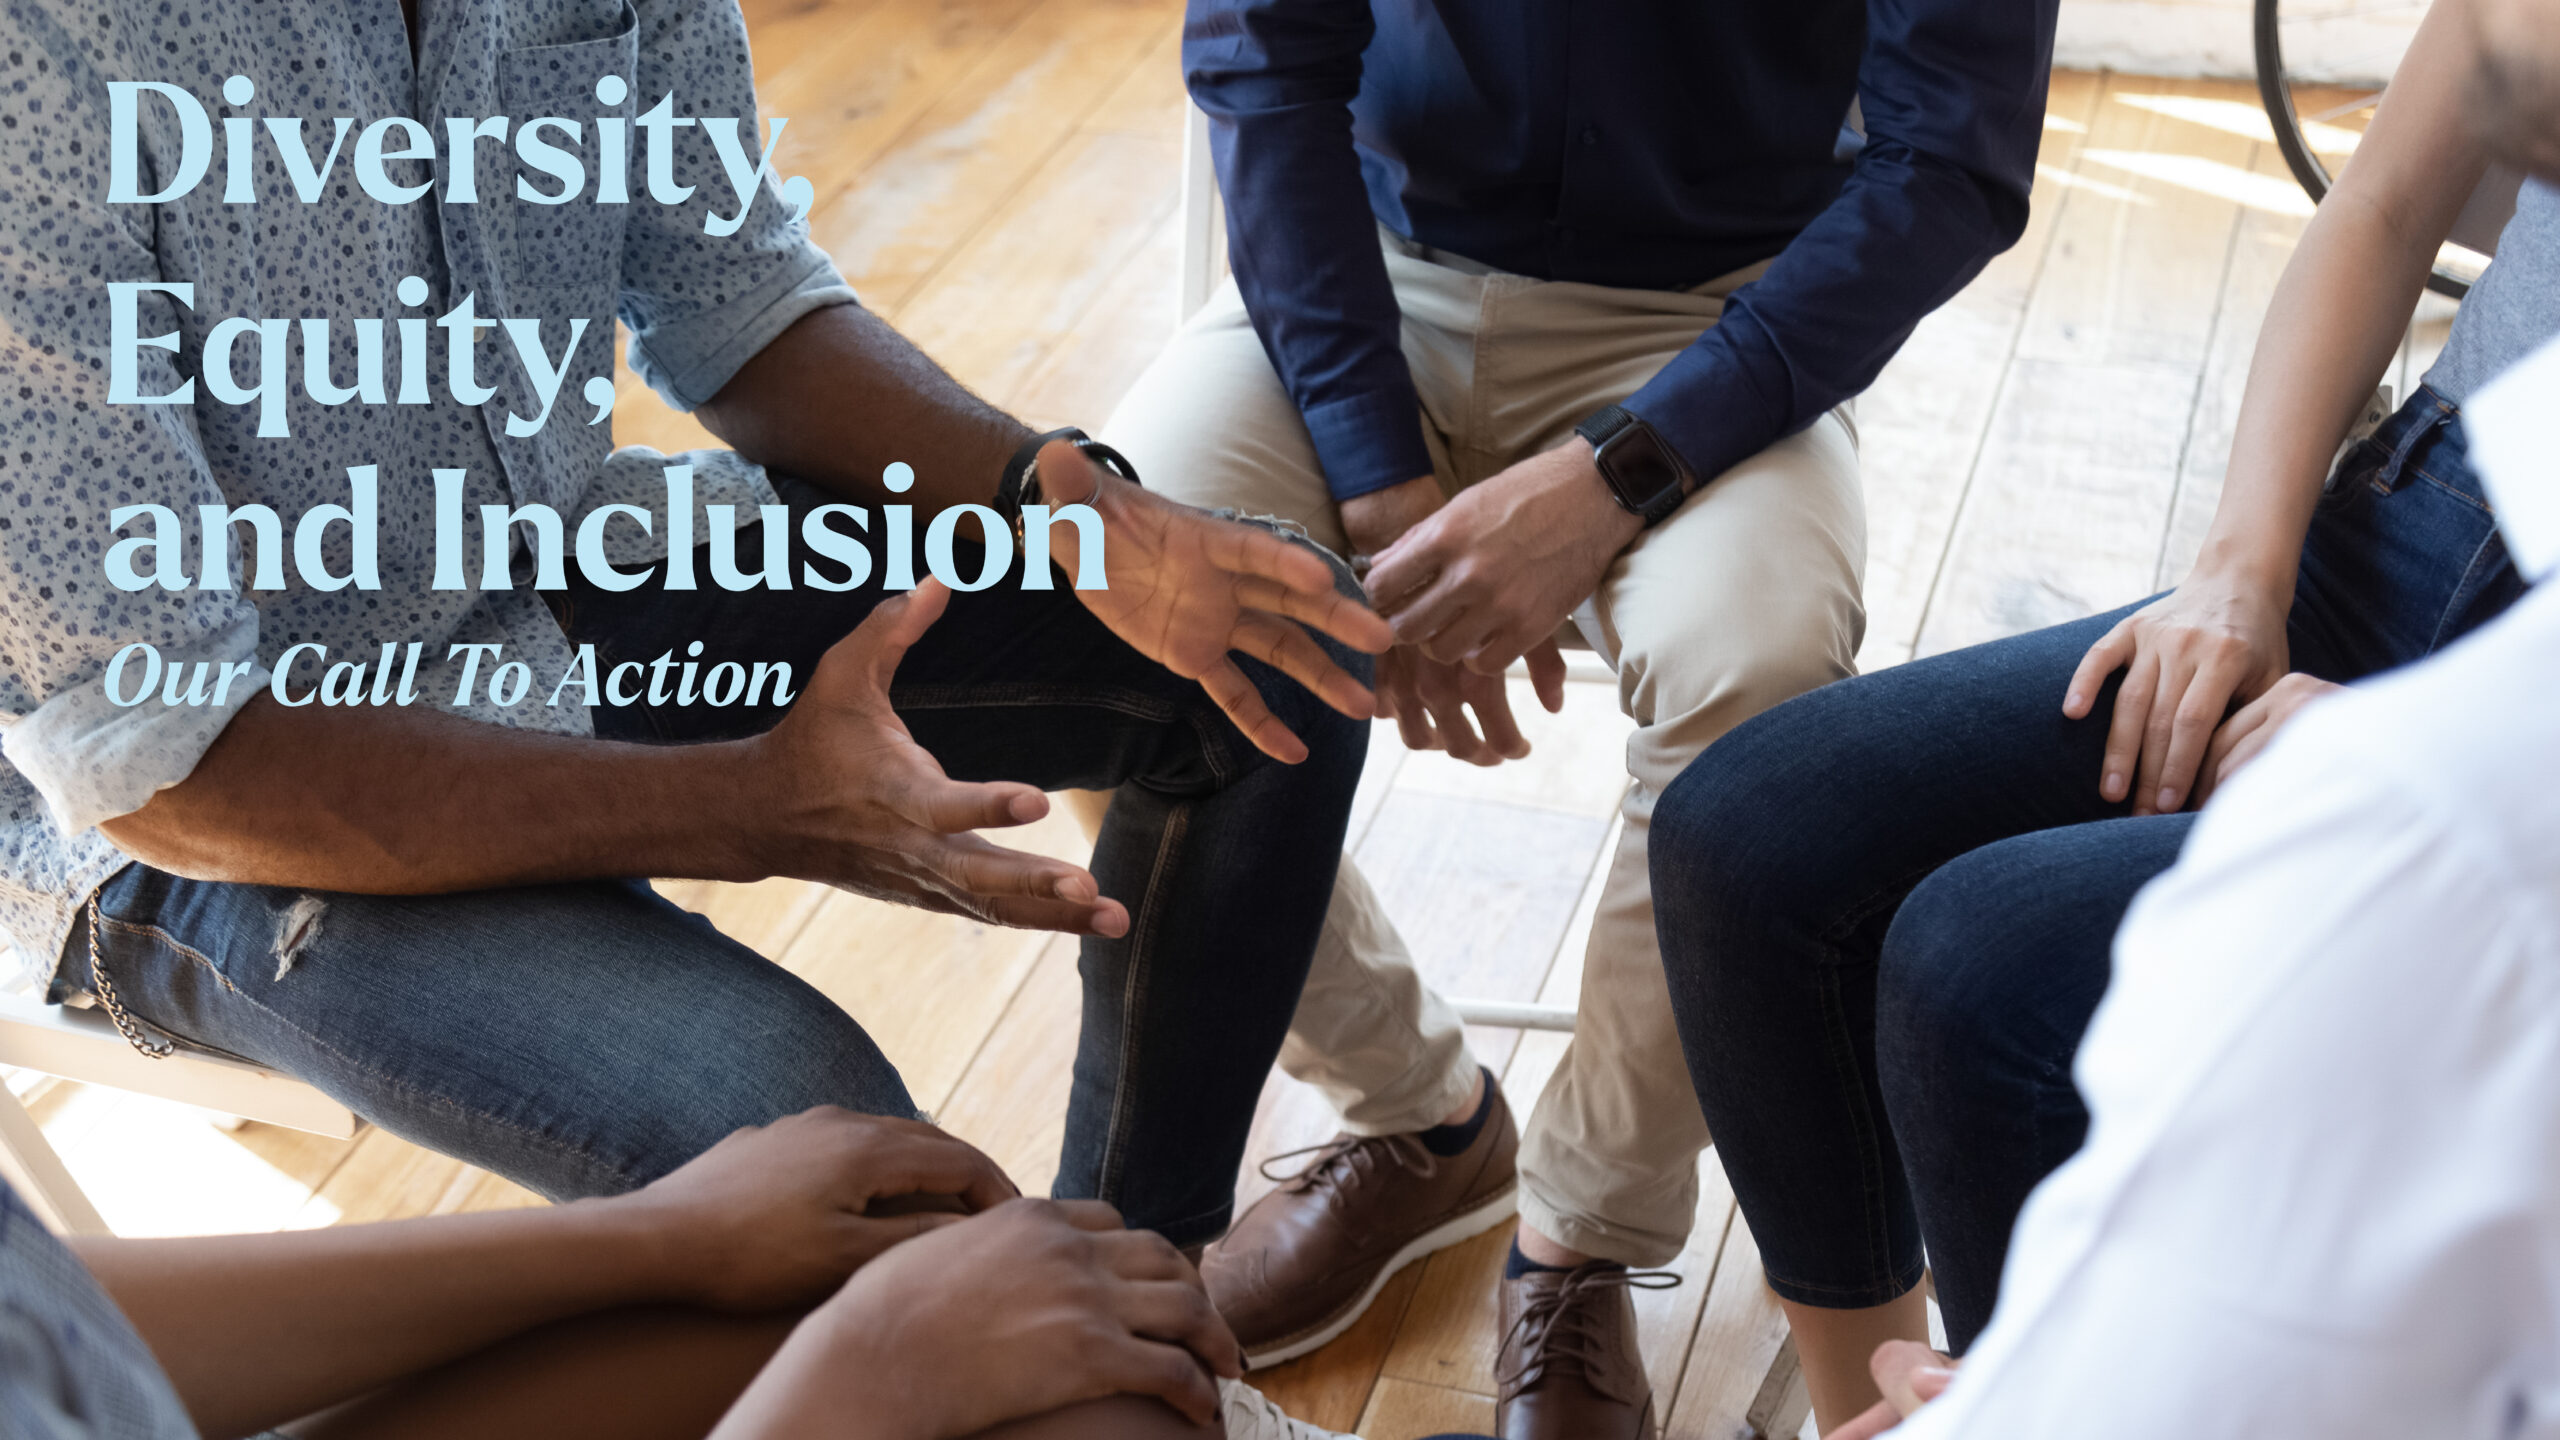 Diversity, Equity, and Inclusion: Our Call to Action